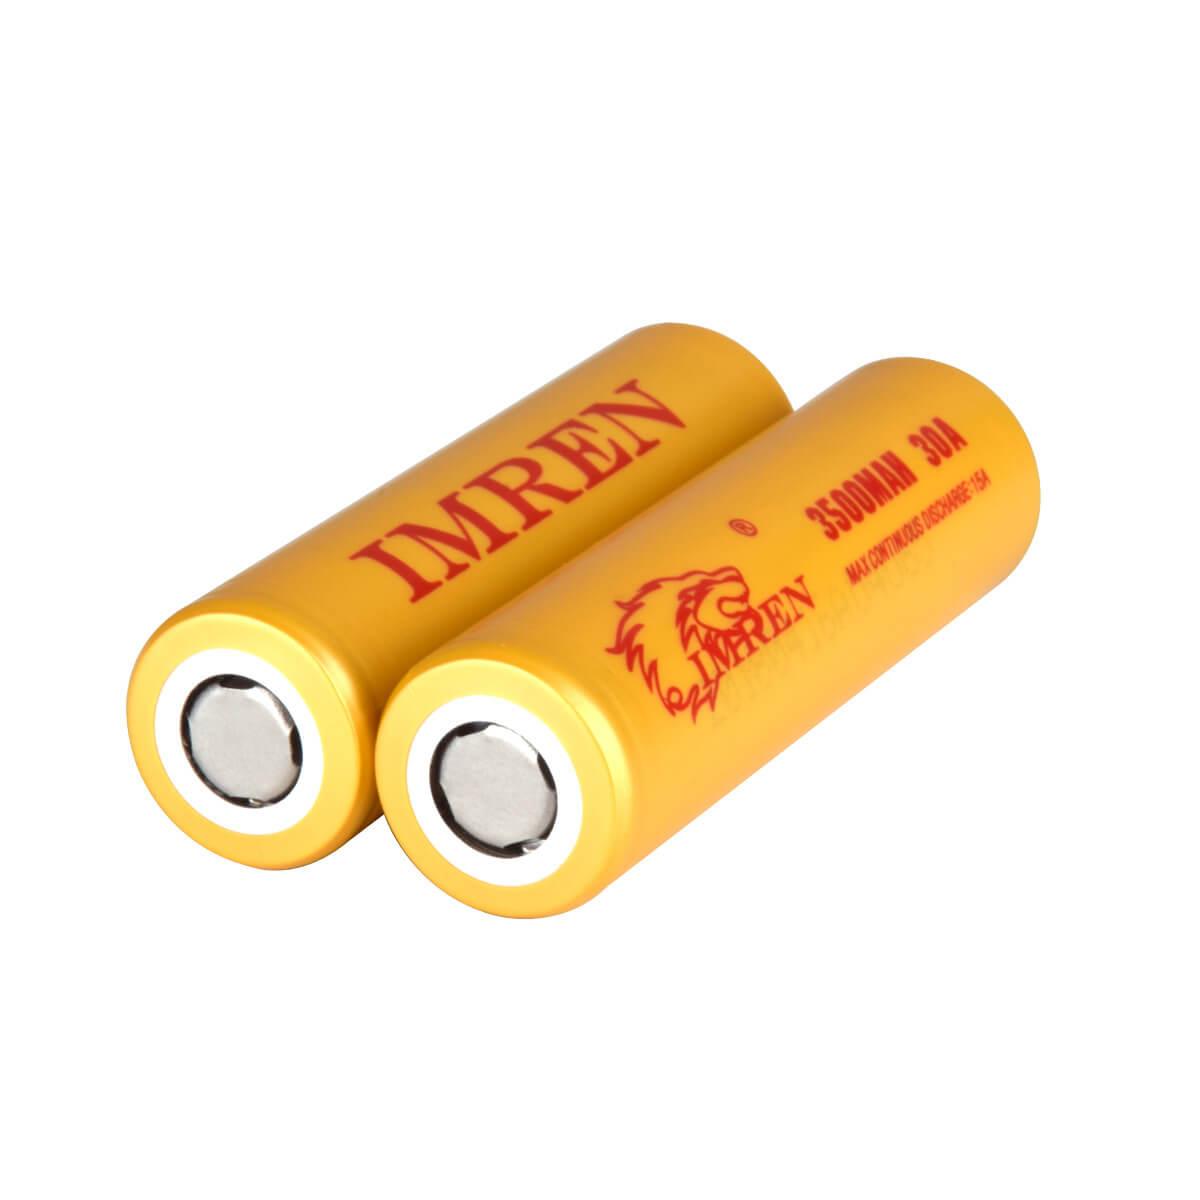 Lithium-ion The - of Store Rechargeable IMREN Battery Best Choice Battery Official